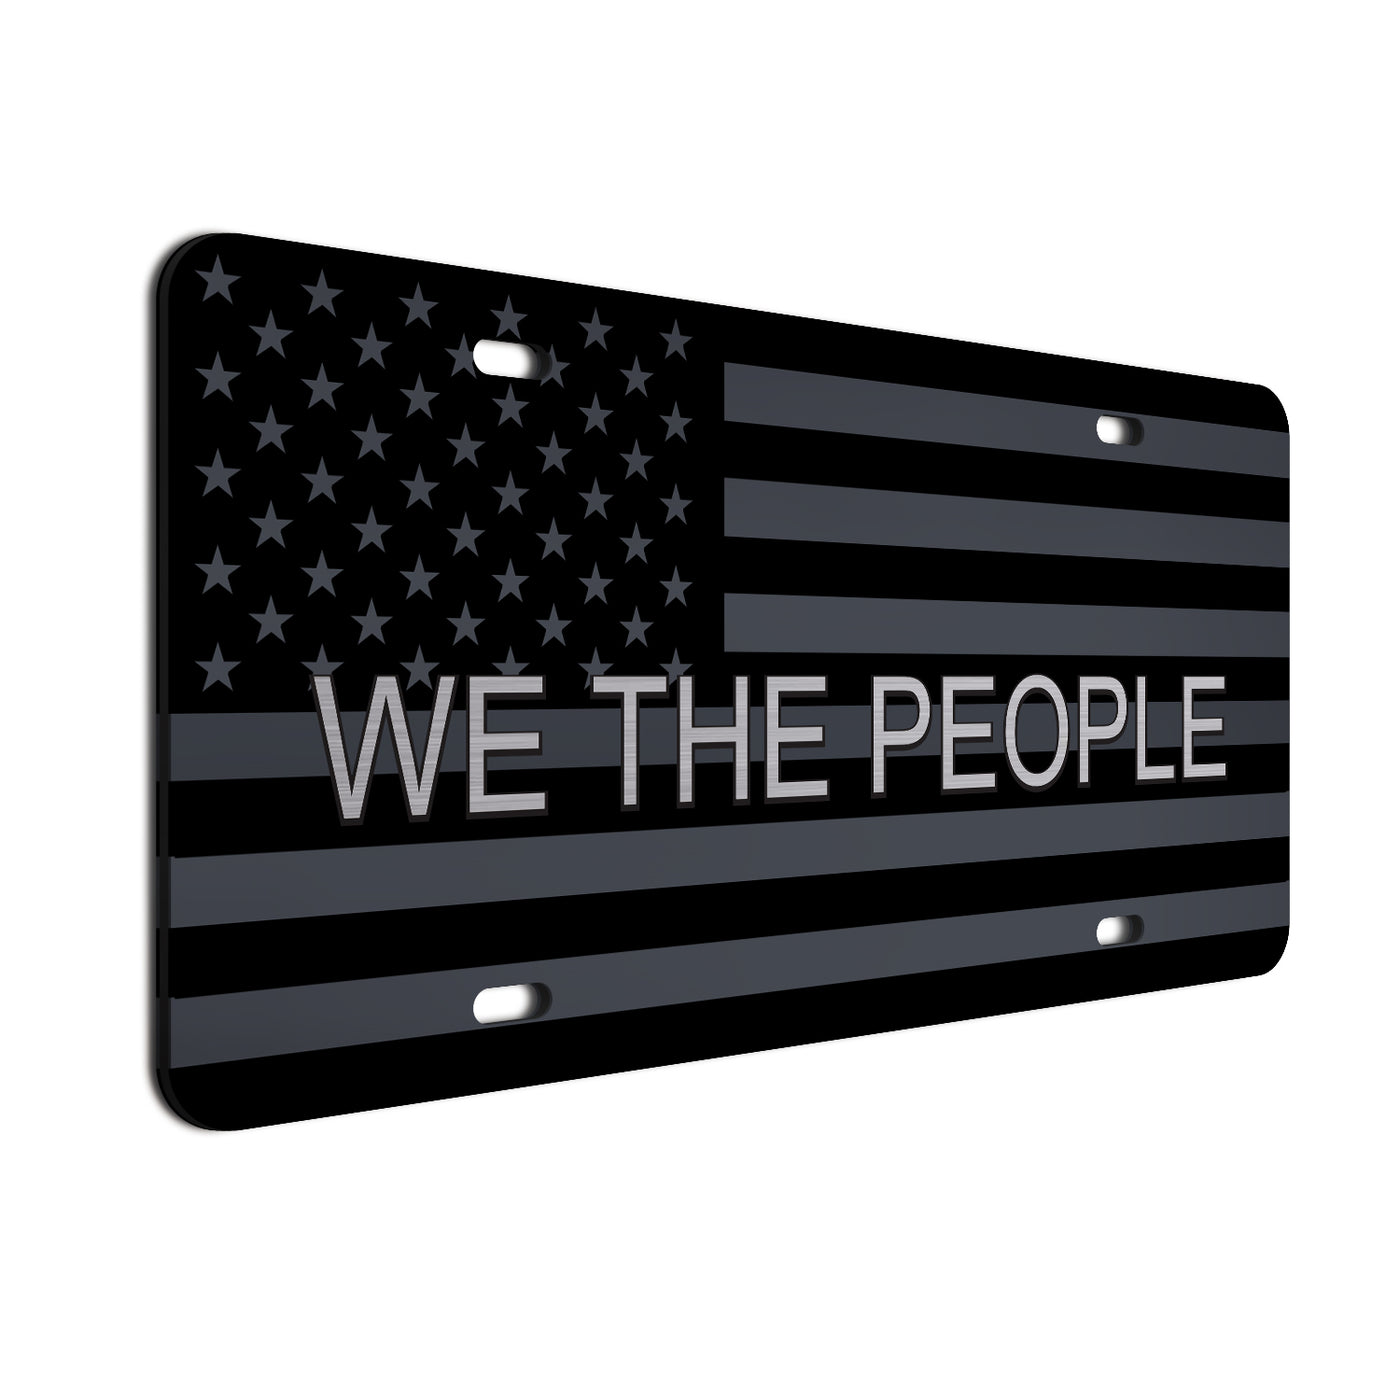 We the People License Plate | Weather Resistant | Made in the USA | Precision-Crafted | Universal 6" x 12" Size with Installation Slots